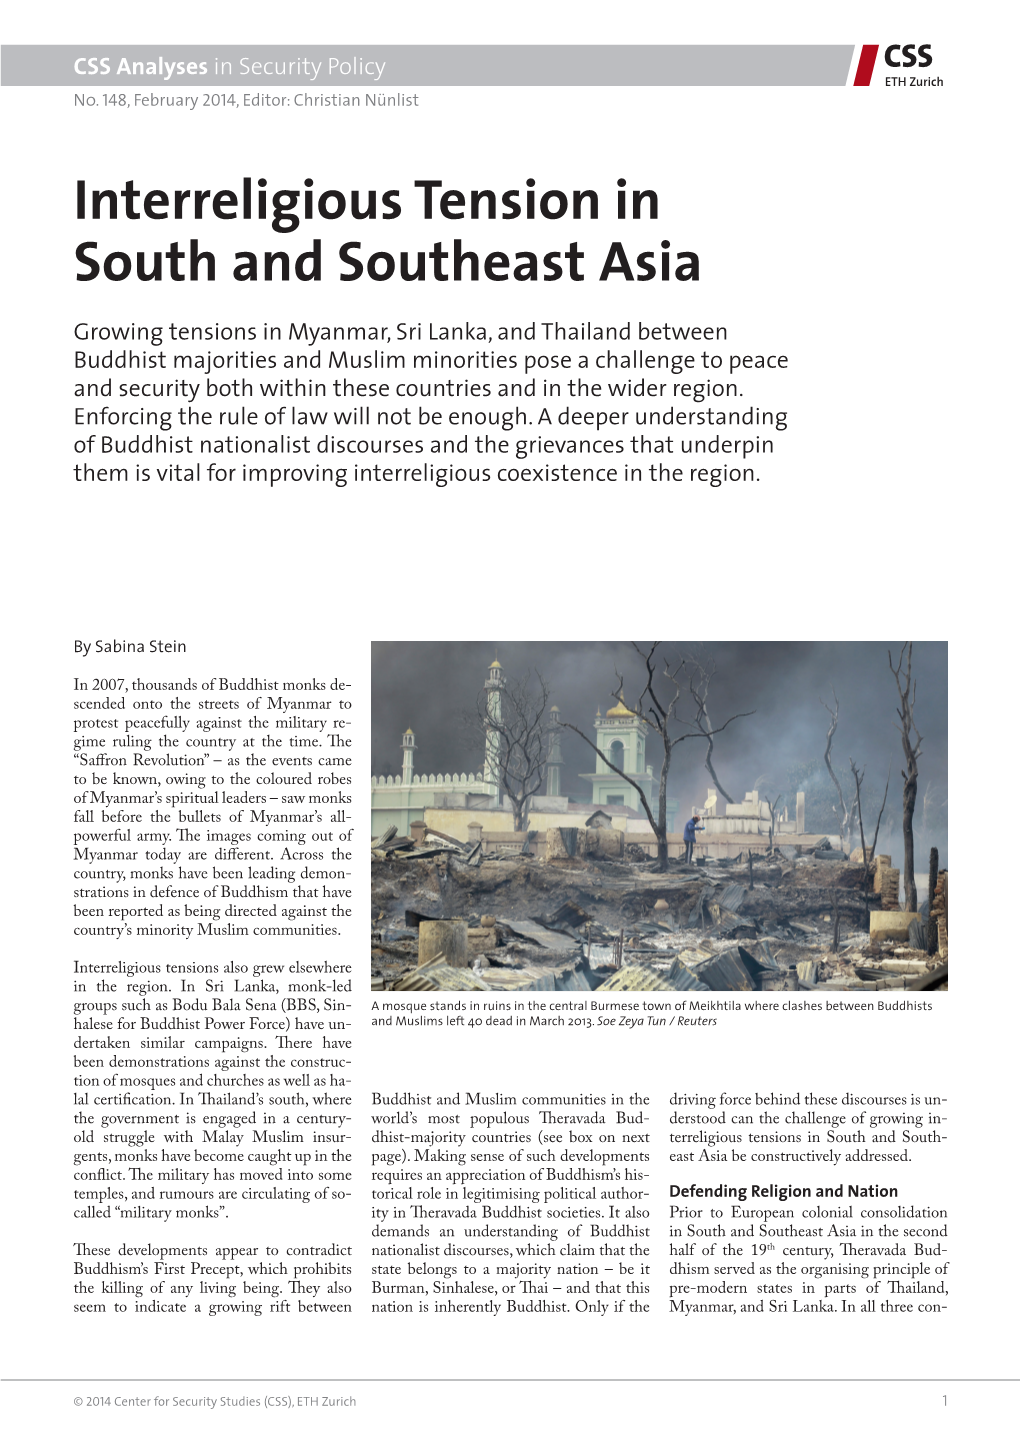 Interreligious Tension in South and Southeast Asia